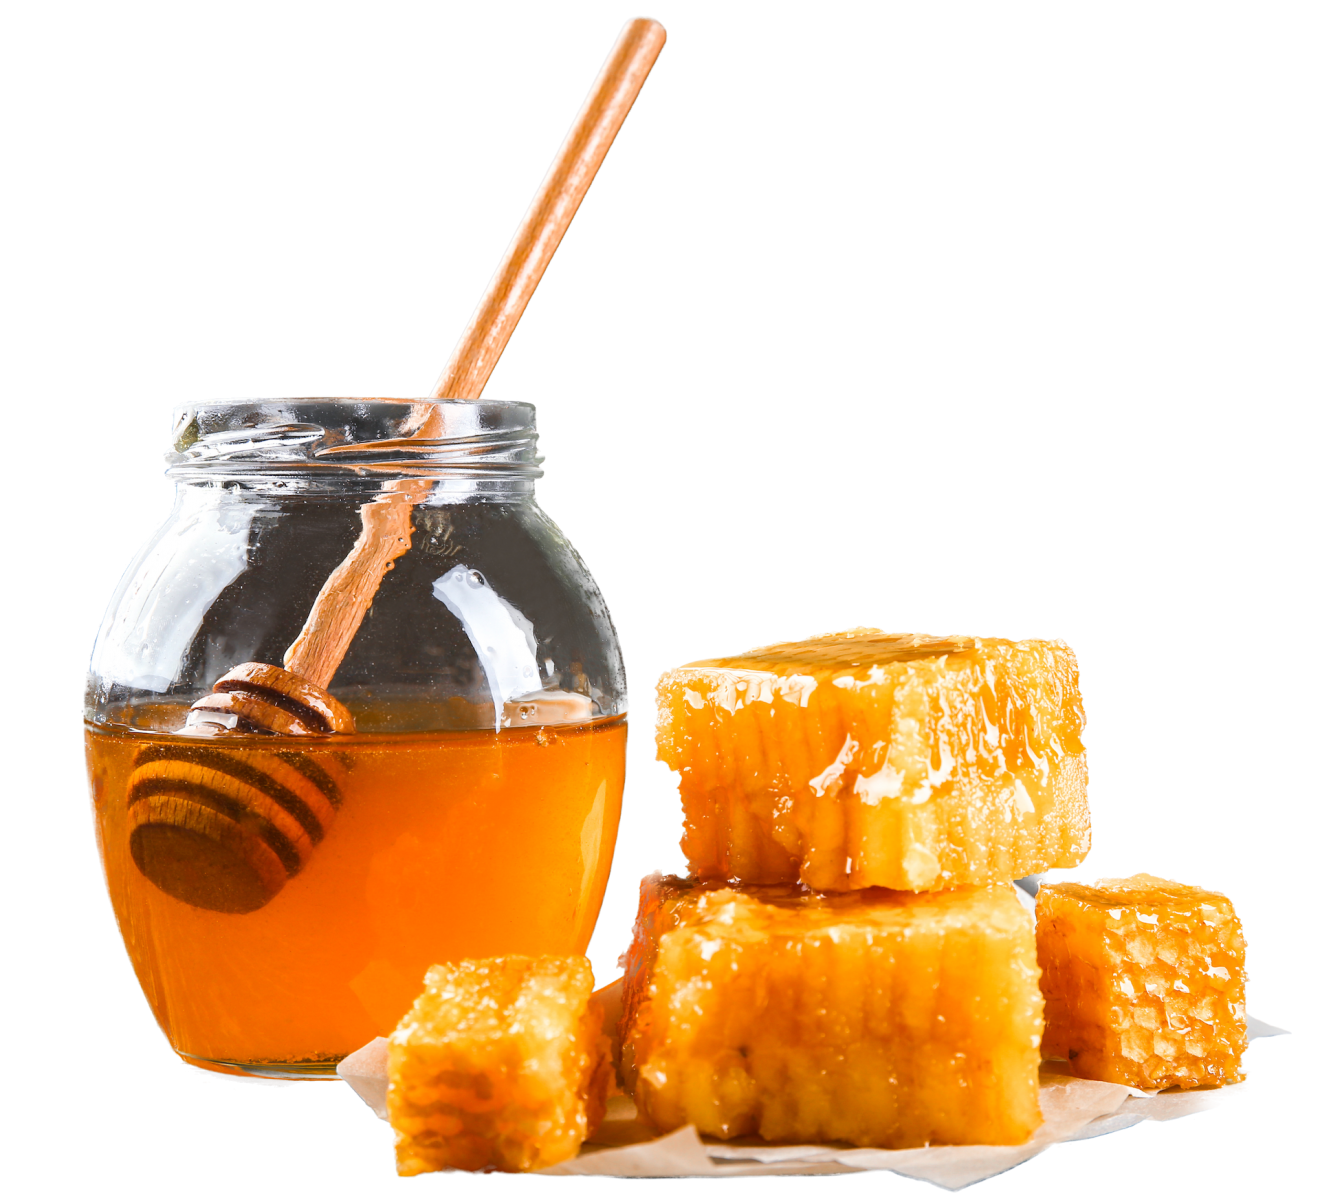 Aromatic honey in jar and honeycombs